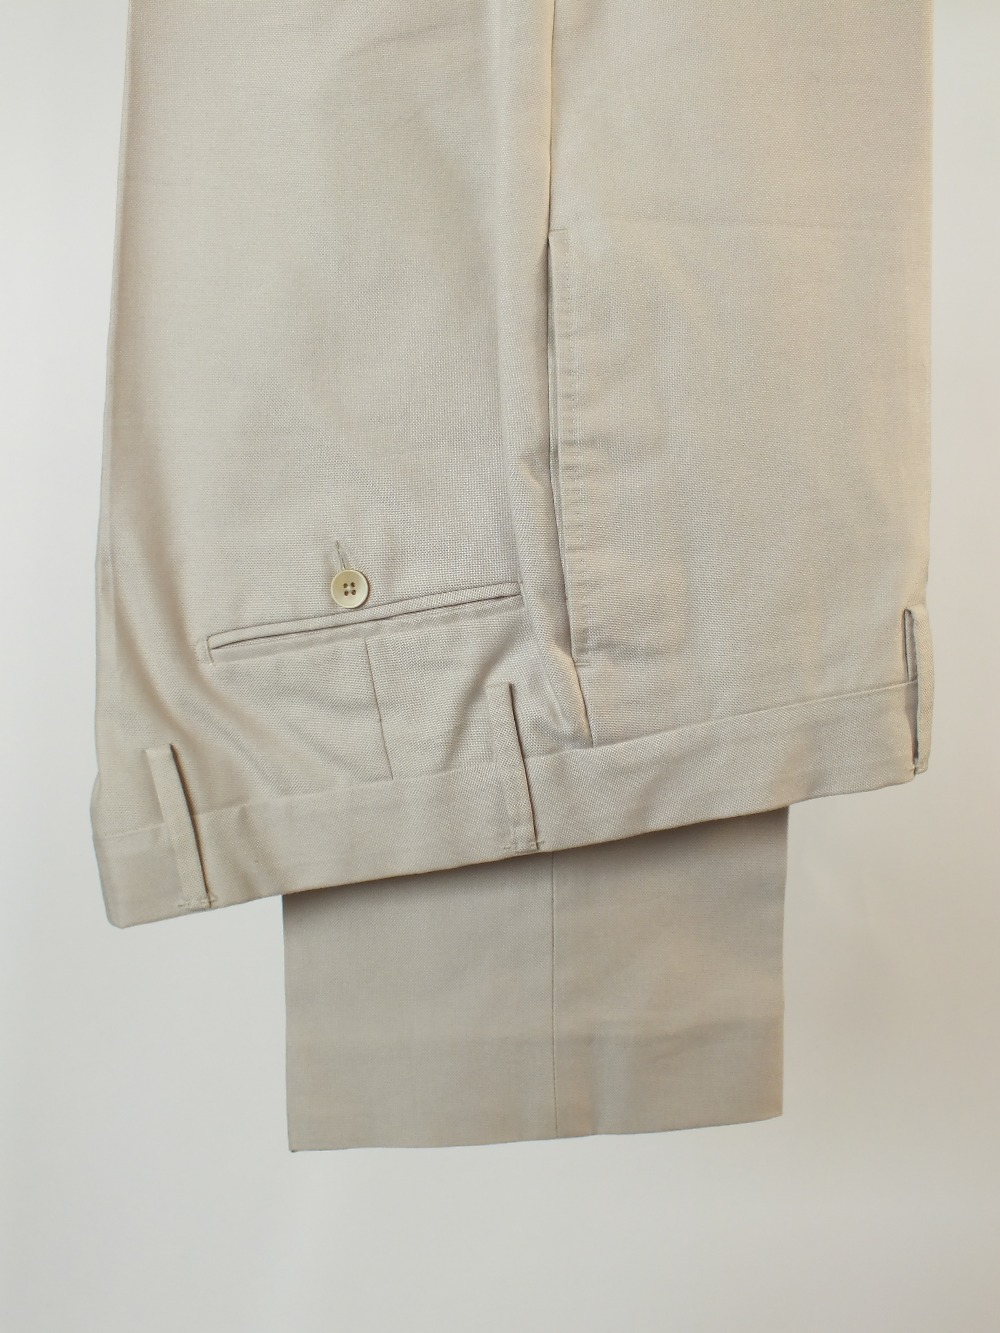 A Gucci suit, stone, double vent, Italian size 50R, 100% cotton, flat front , button fly, signs of - Image 6 of 6